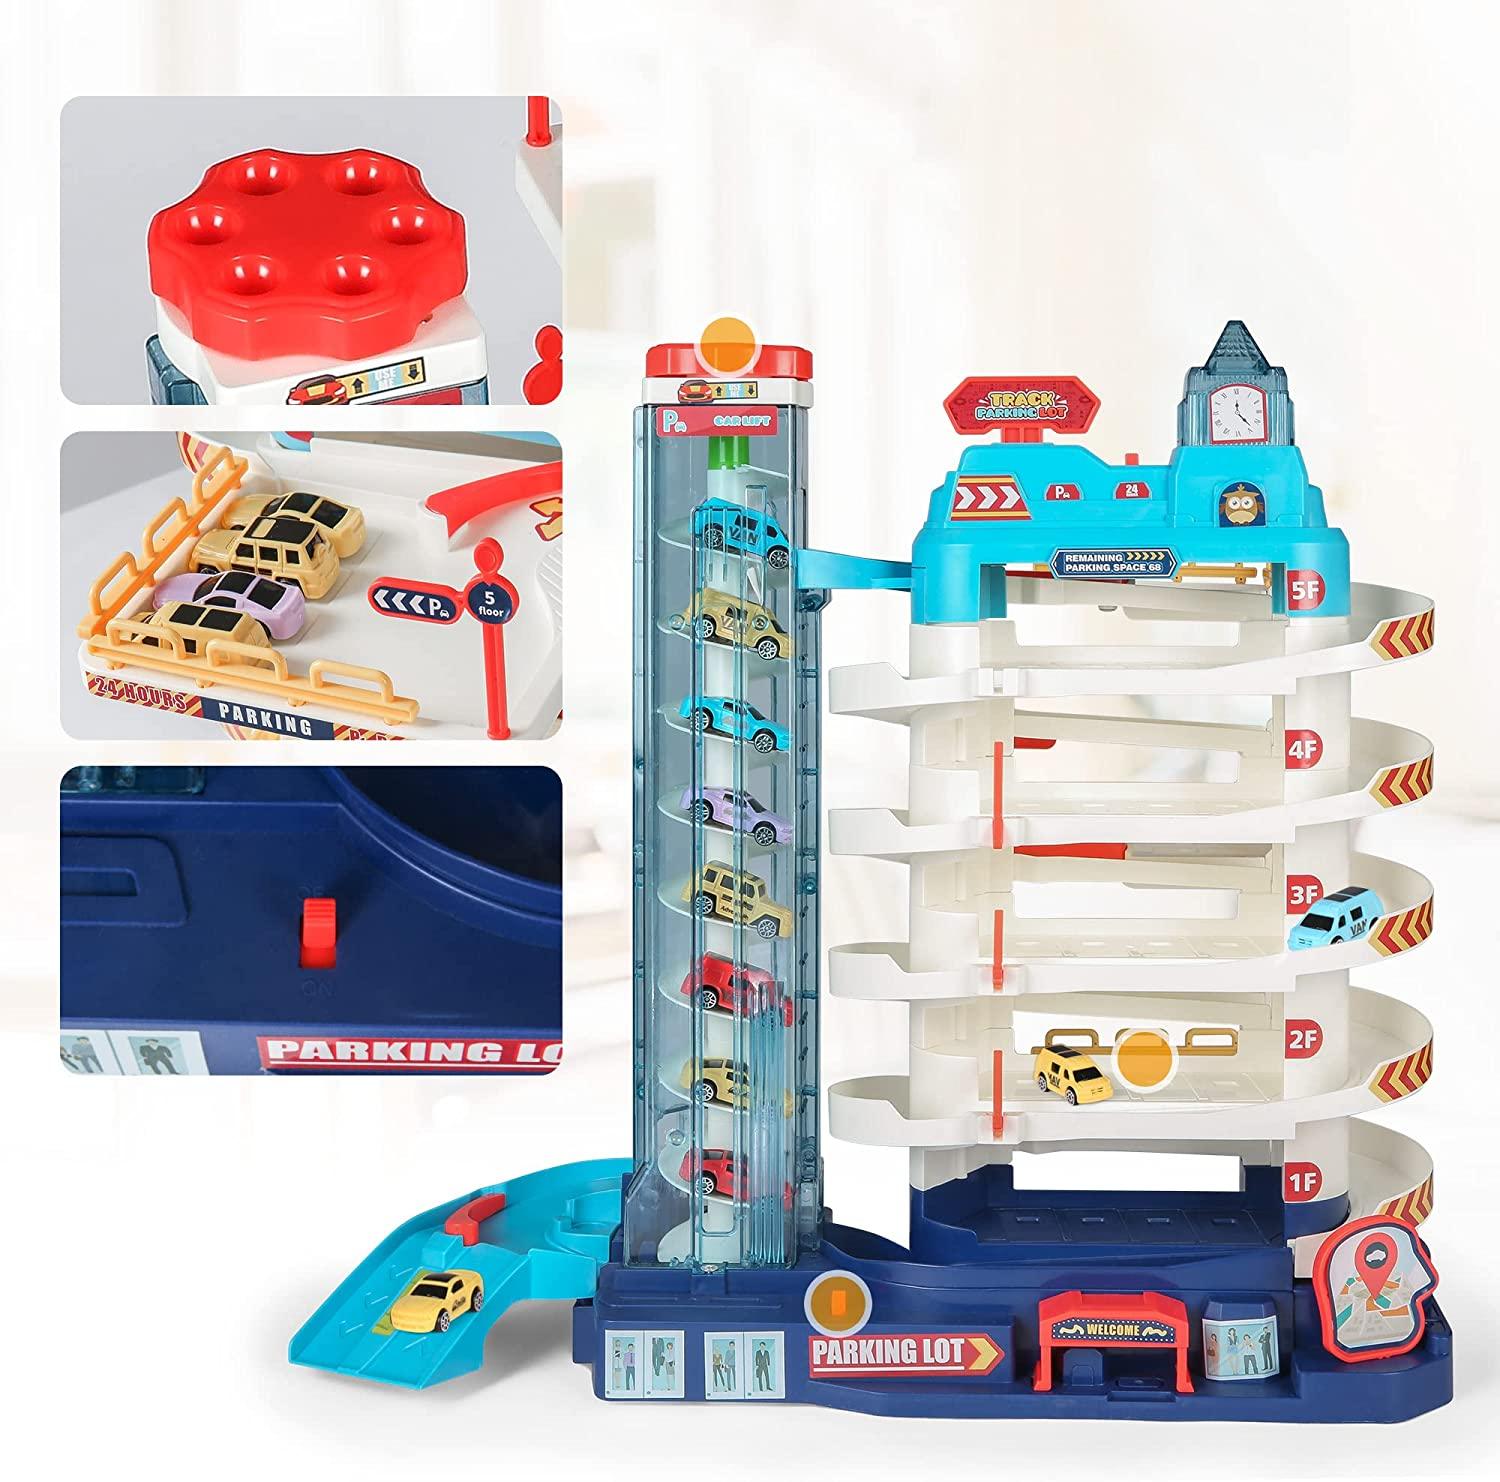 5-Level Parking Garage Toy Play Set - Kids Electric & Manual Car Track Set with 8 Cars and 1 Road Map - Toddlers Parking Lot Toys for 3+ Years Old - Bosonshop